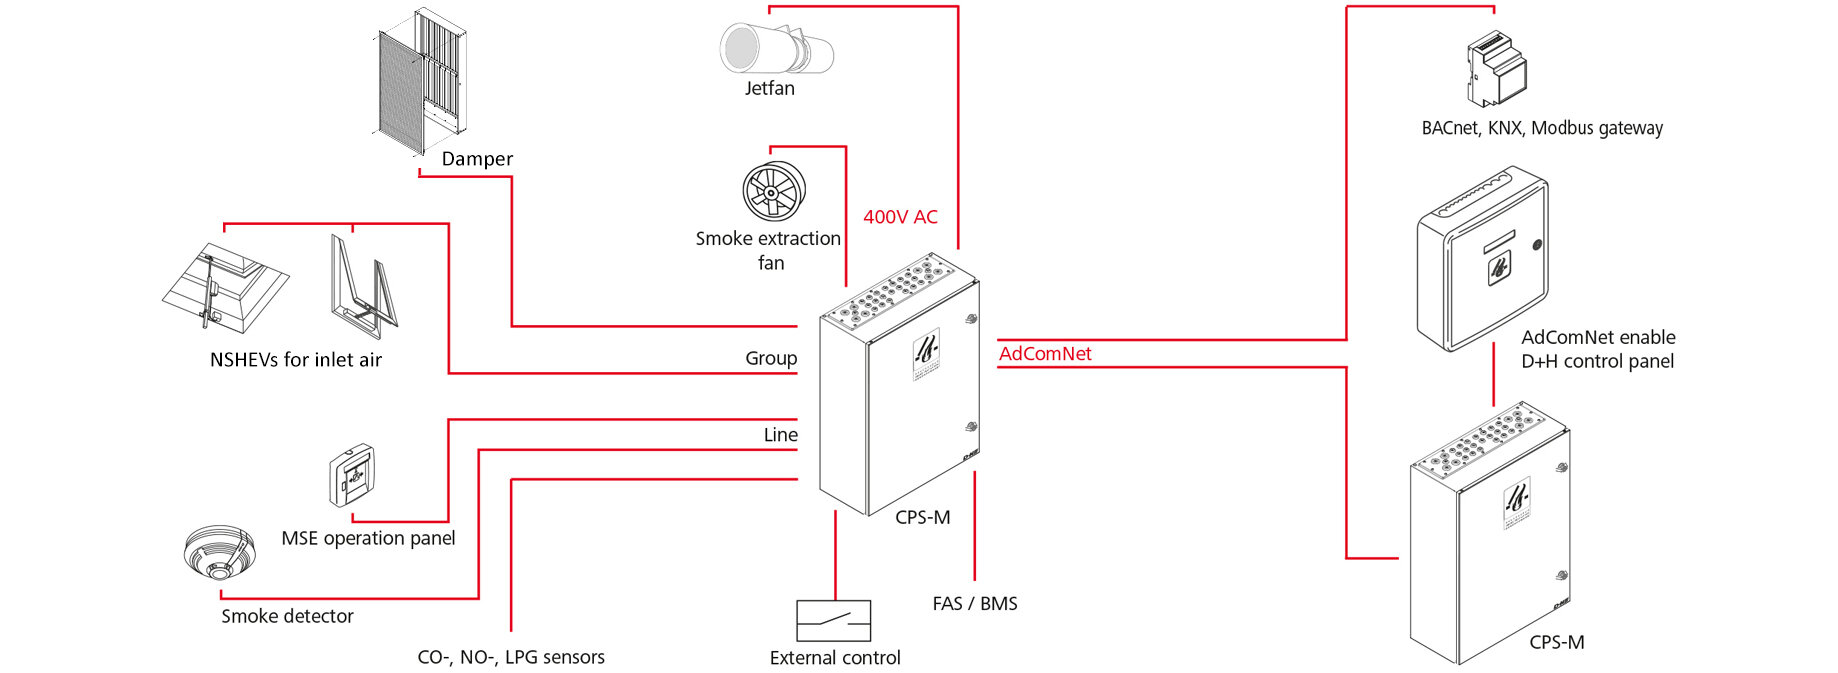 Technical drawing diagram of mechanical smoke vent system